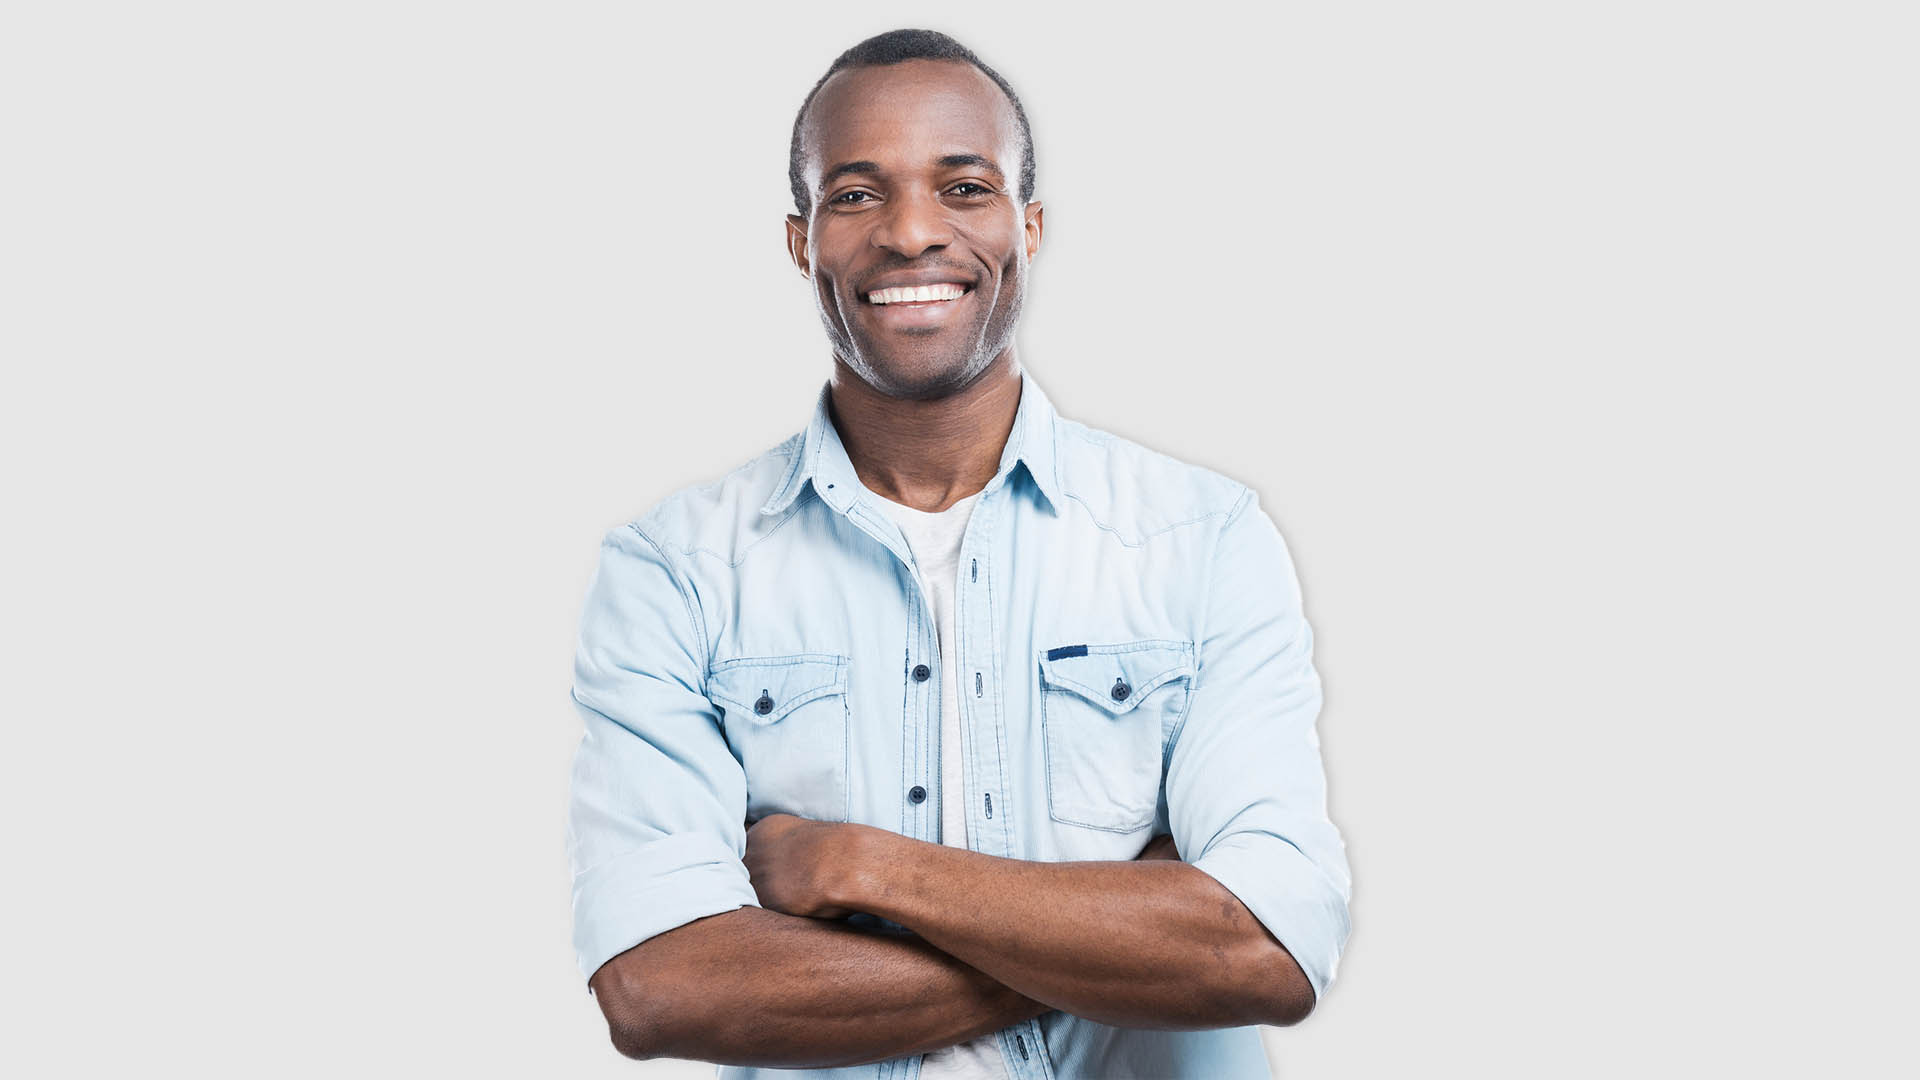 Middle aged african american man smiling | Chronic Disease Management | Shahla Medical Group